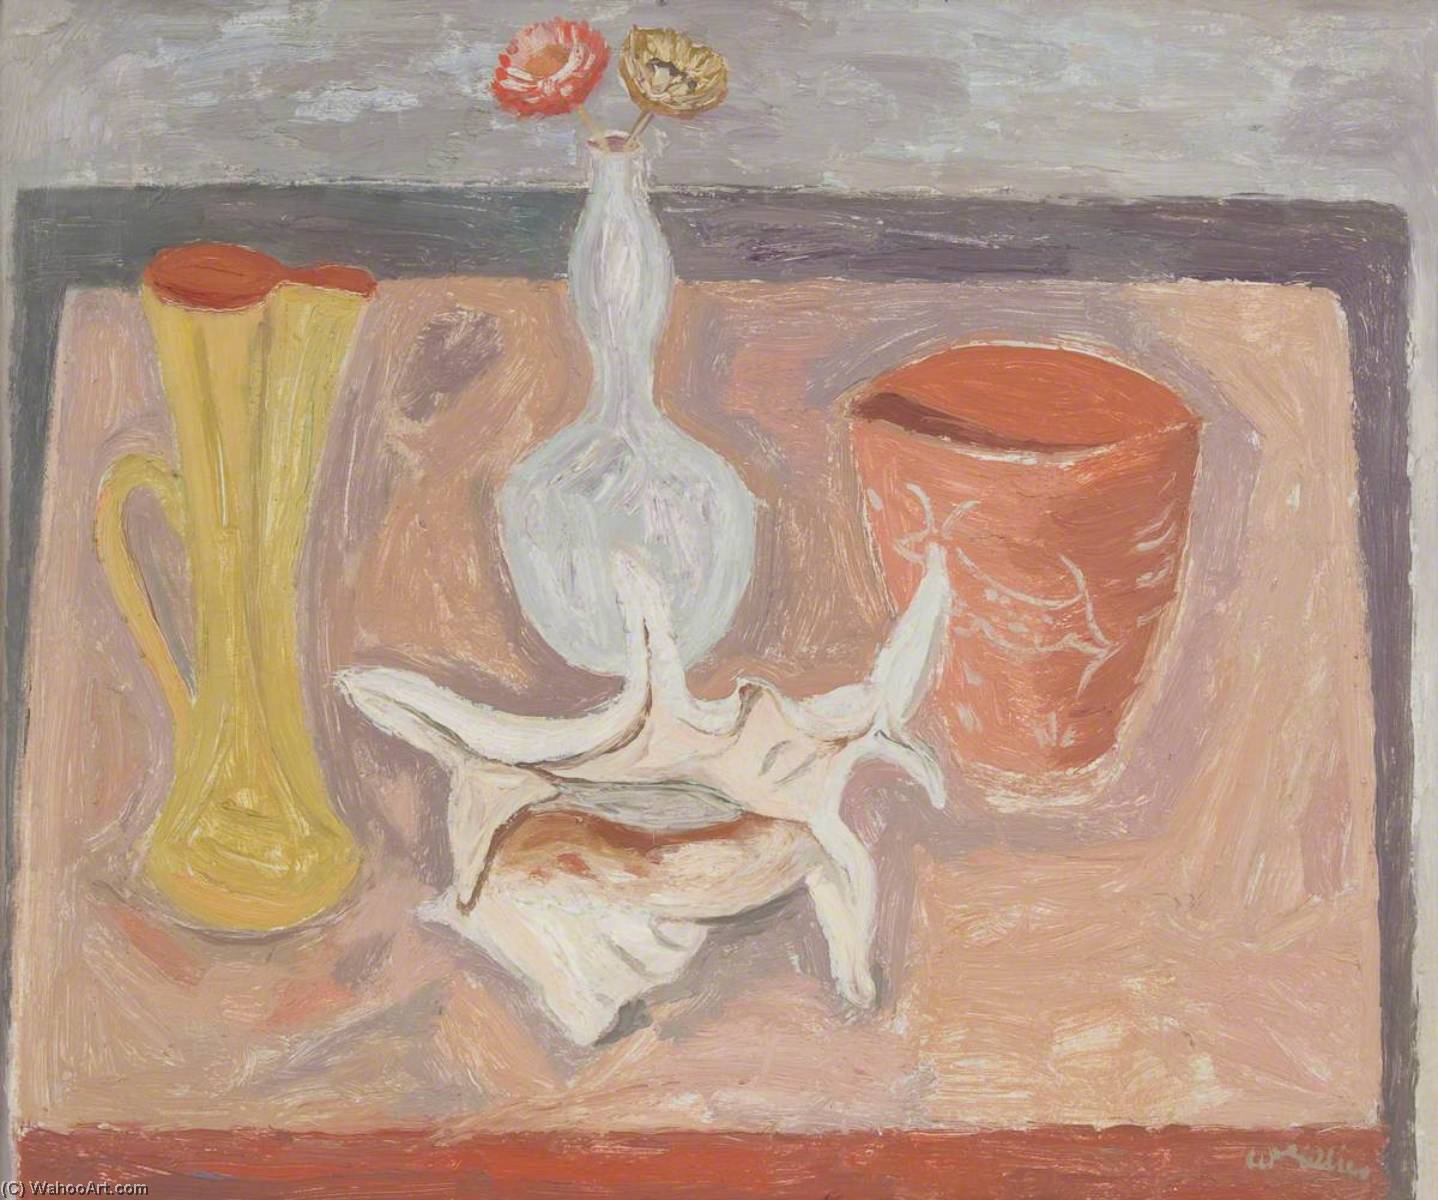 Still Life with Shell, 1950 by William George Gillies William George Gillies | ArtsDot.com